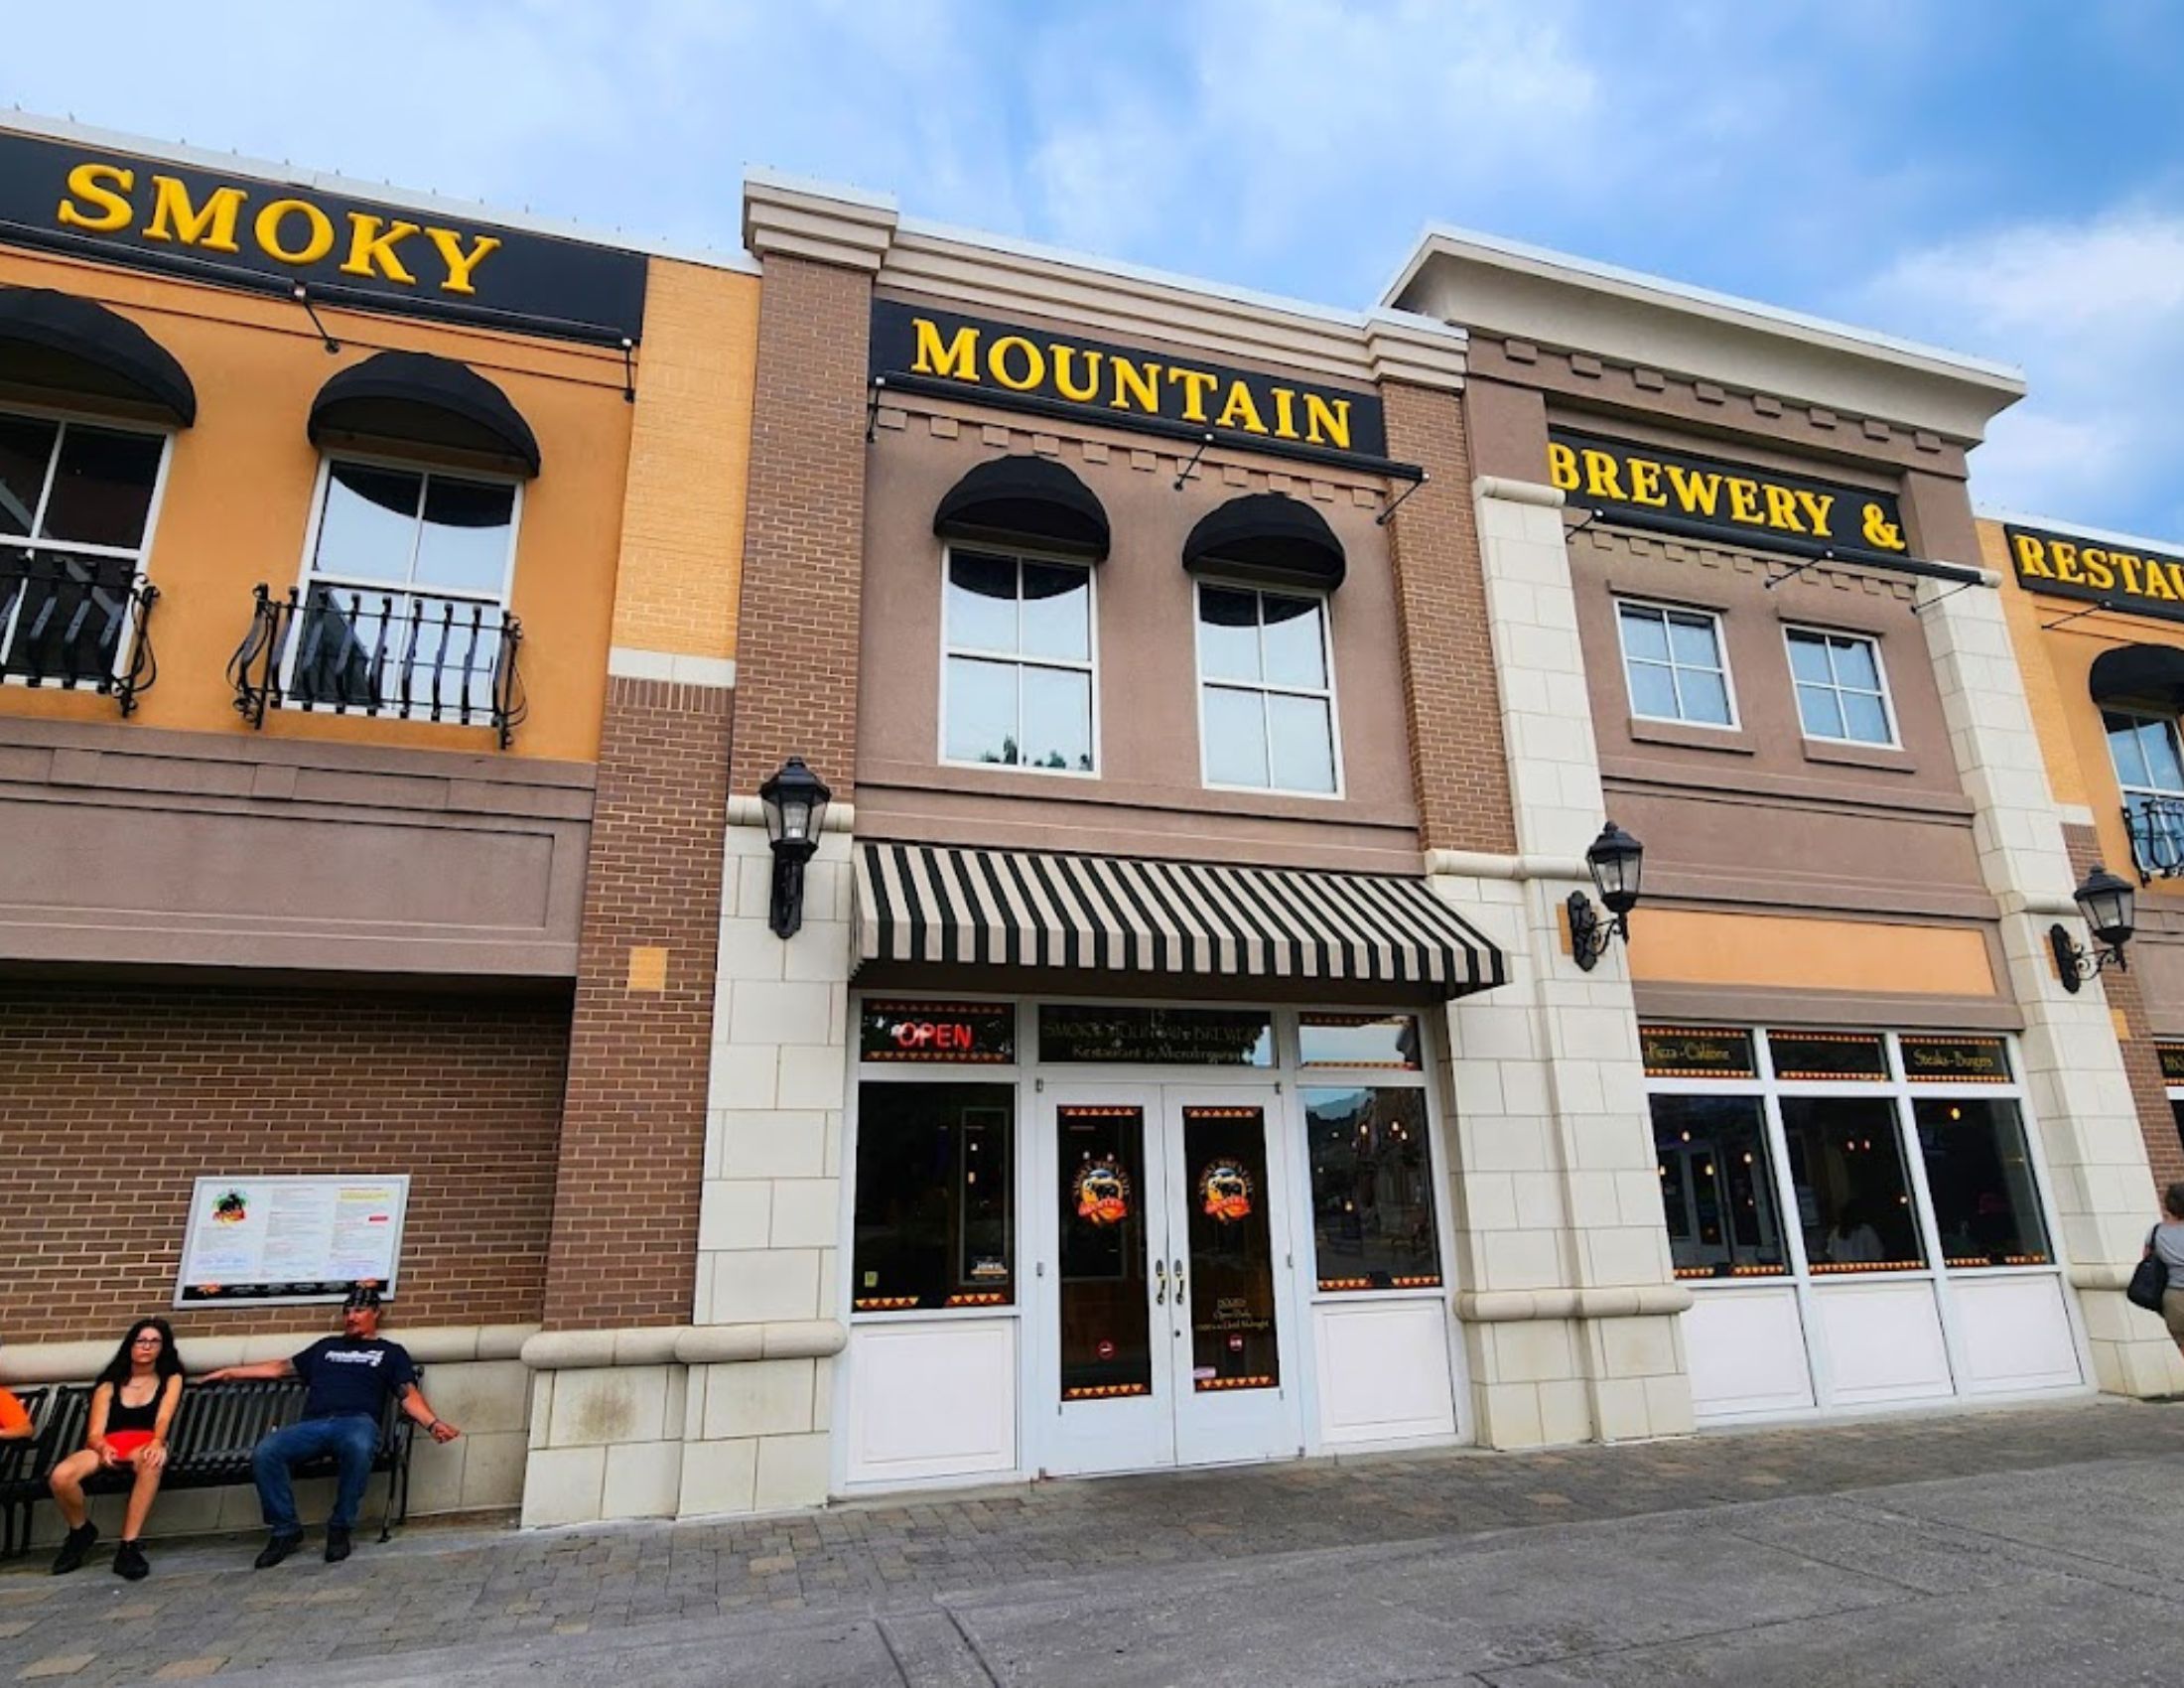 Smoky Mountain Brewery in Pigeon Forge